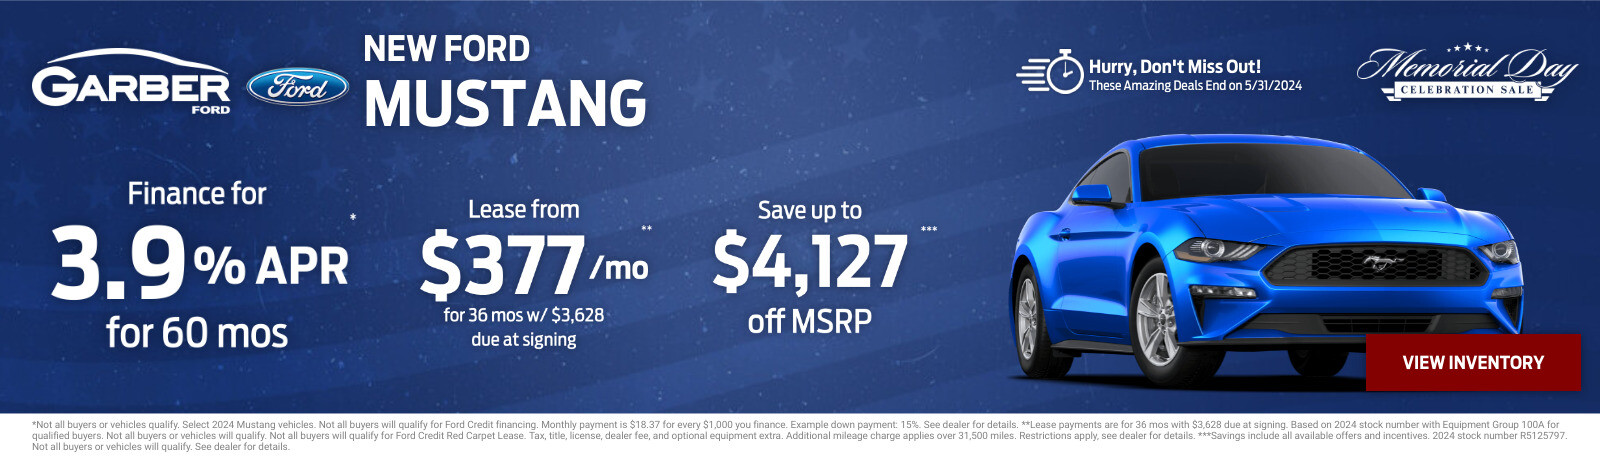 New Ford Mustang Current Deals and Offers in Green Cove Springs, FL